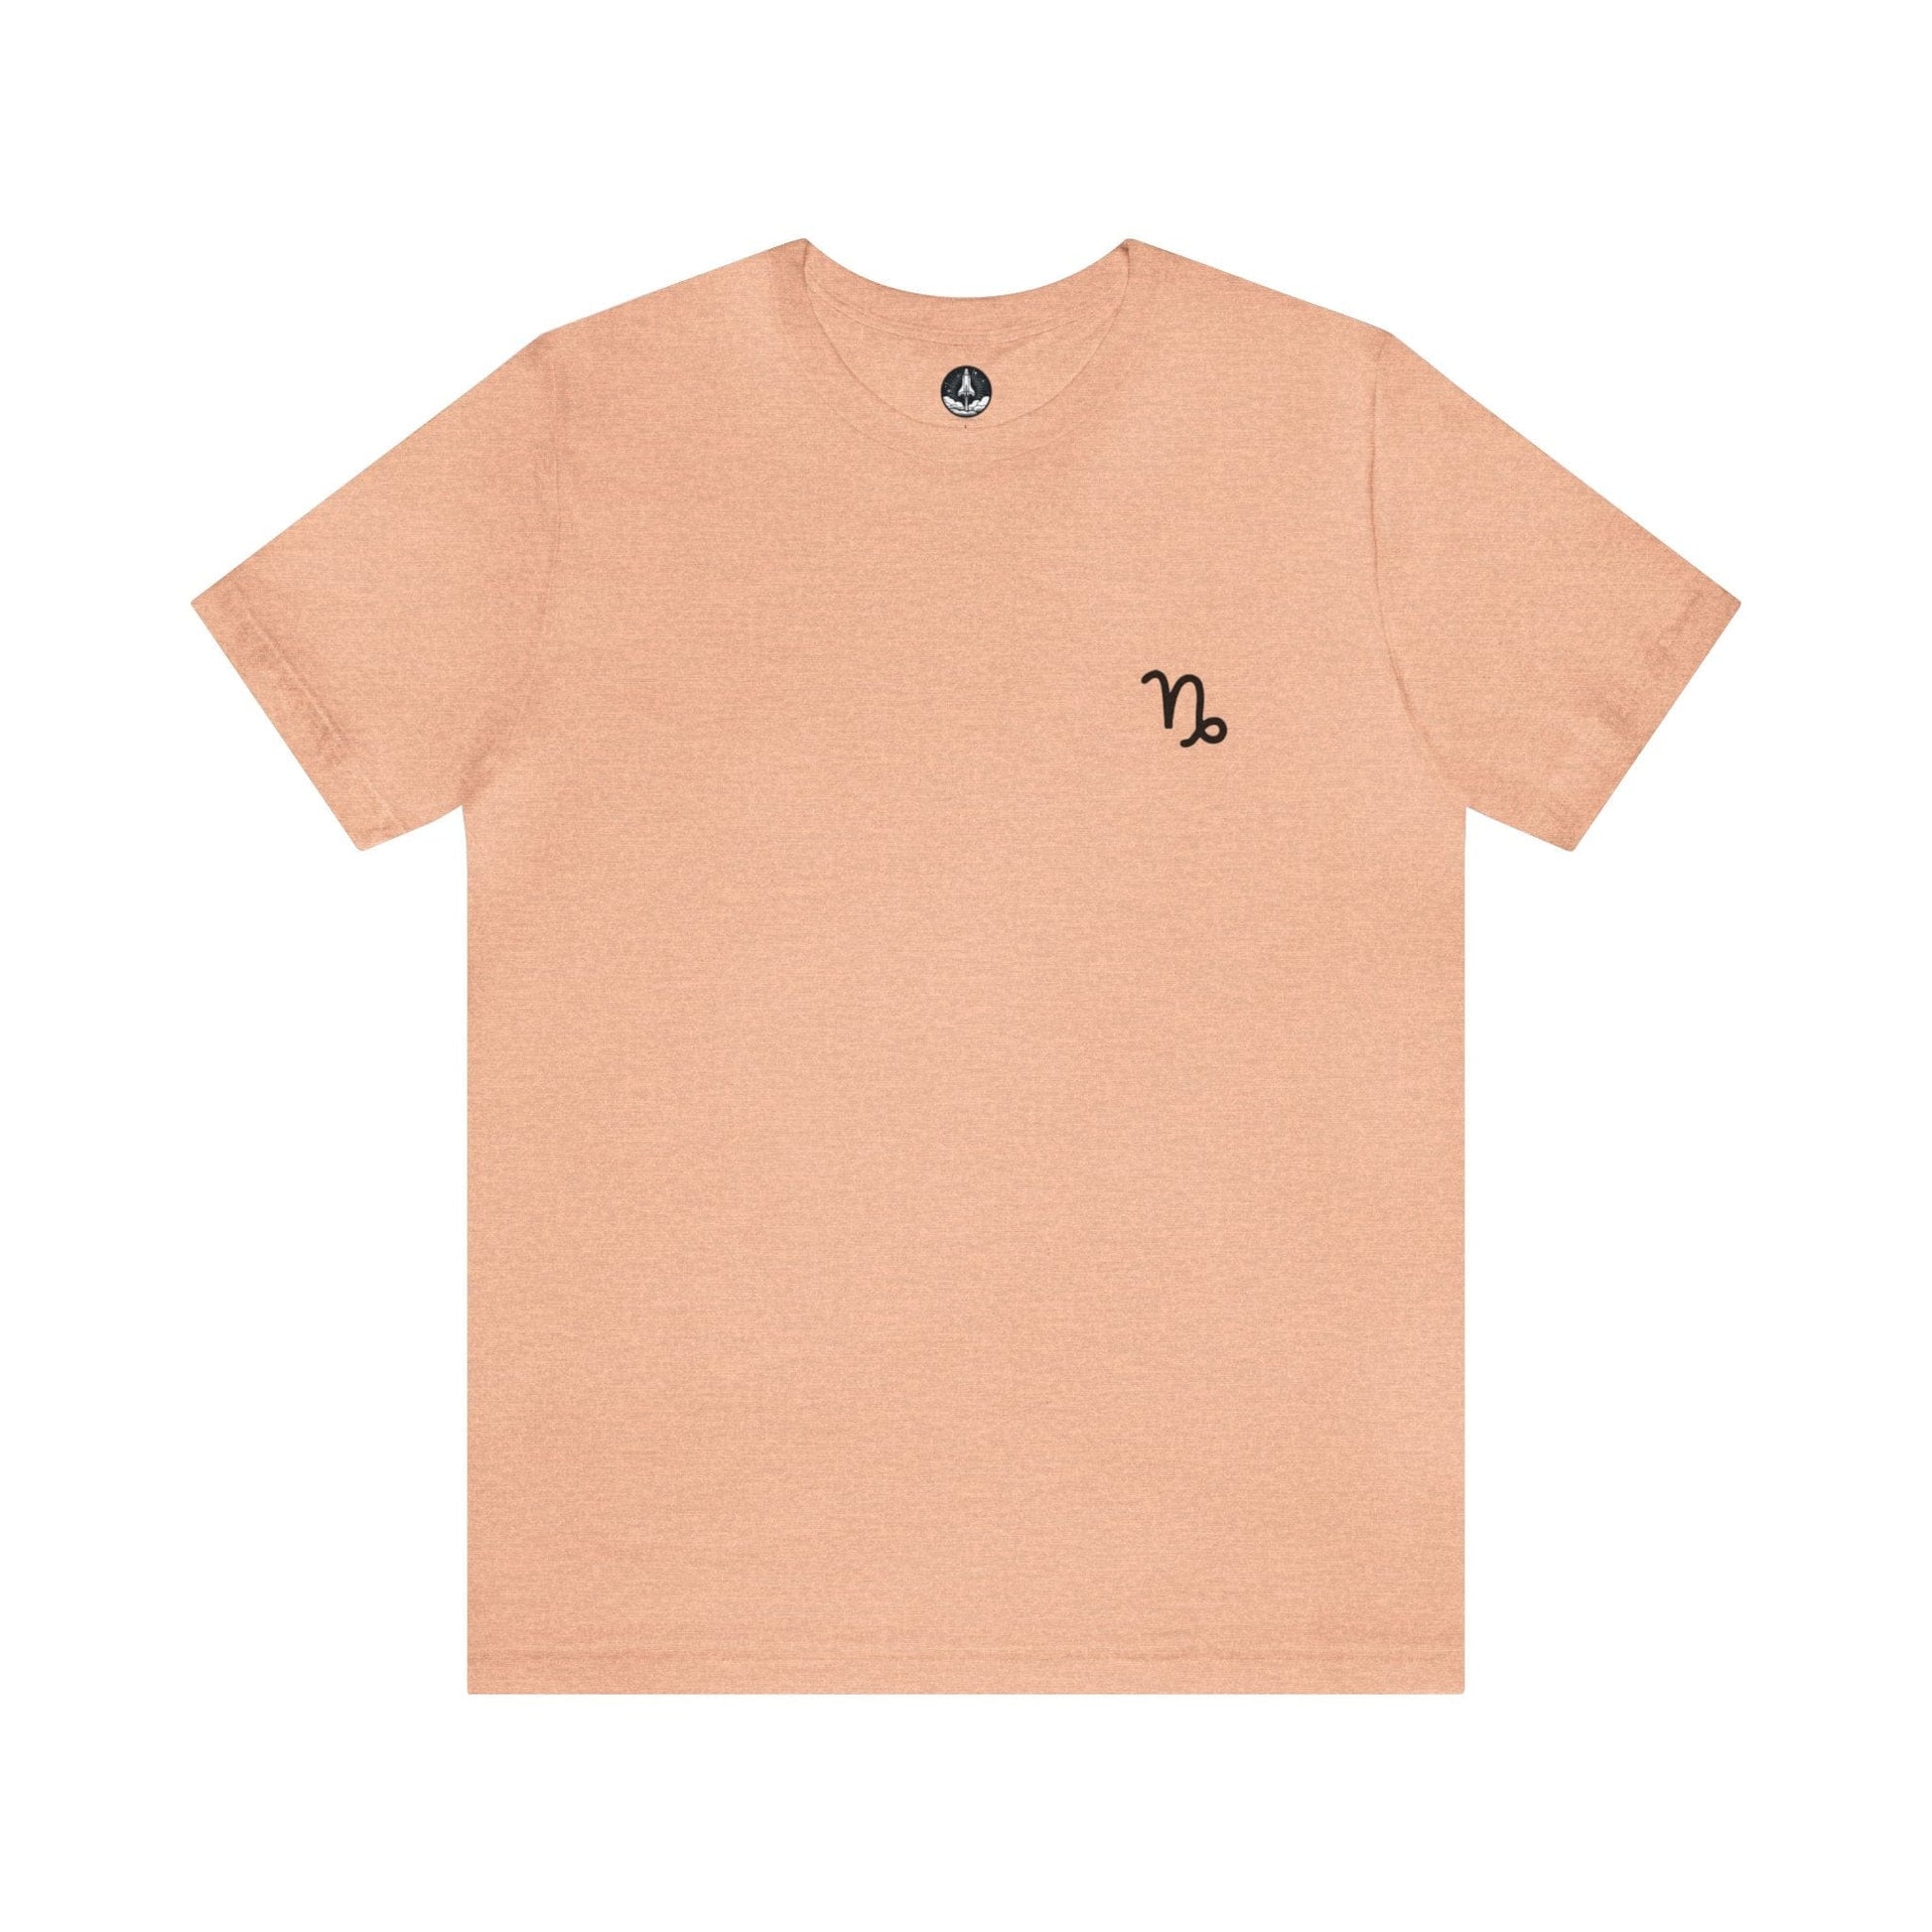 T-Shirt Heather Peach / S Capricorn Mountain Glyph T-Shirt: Peak Style for the Determined Climber